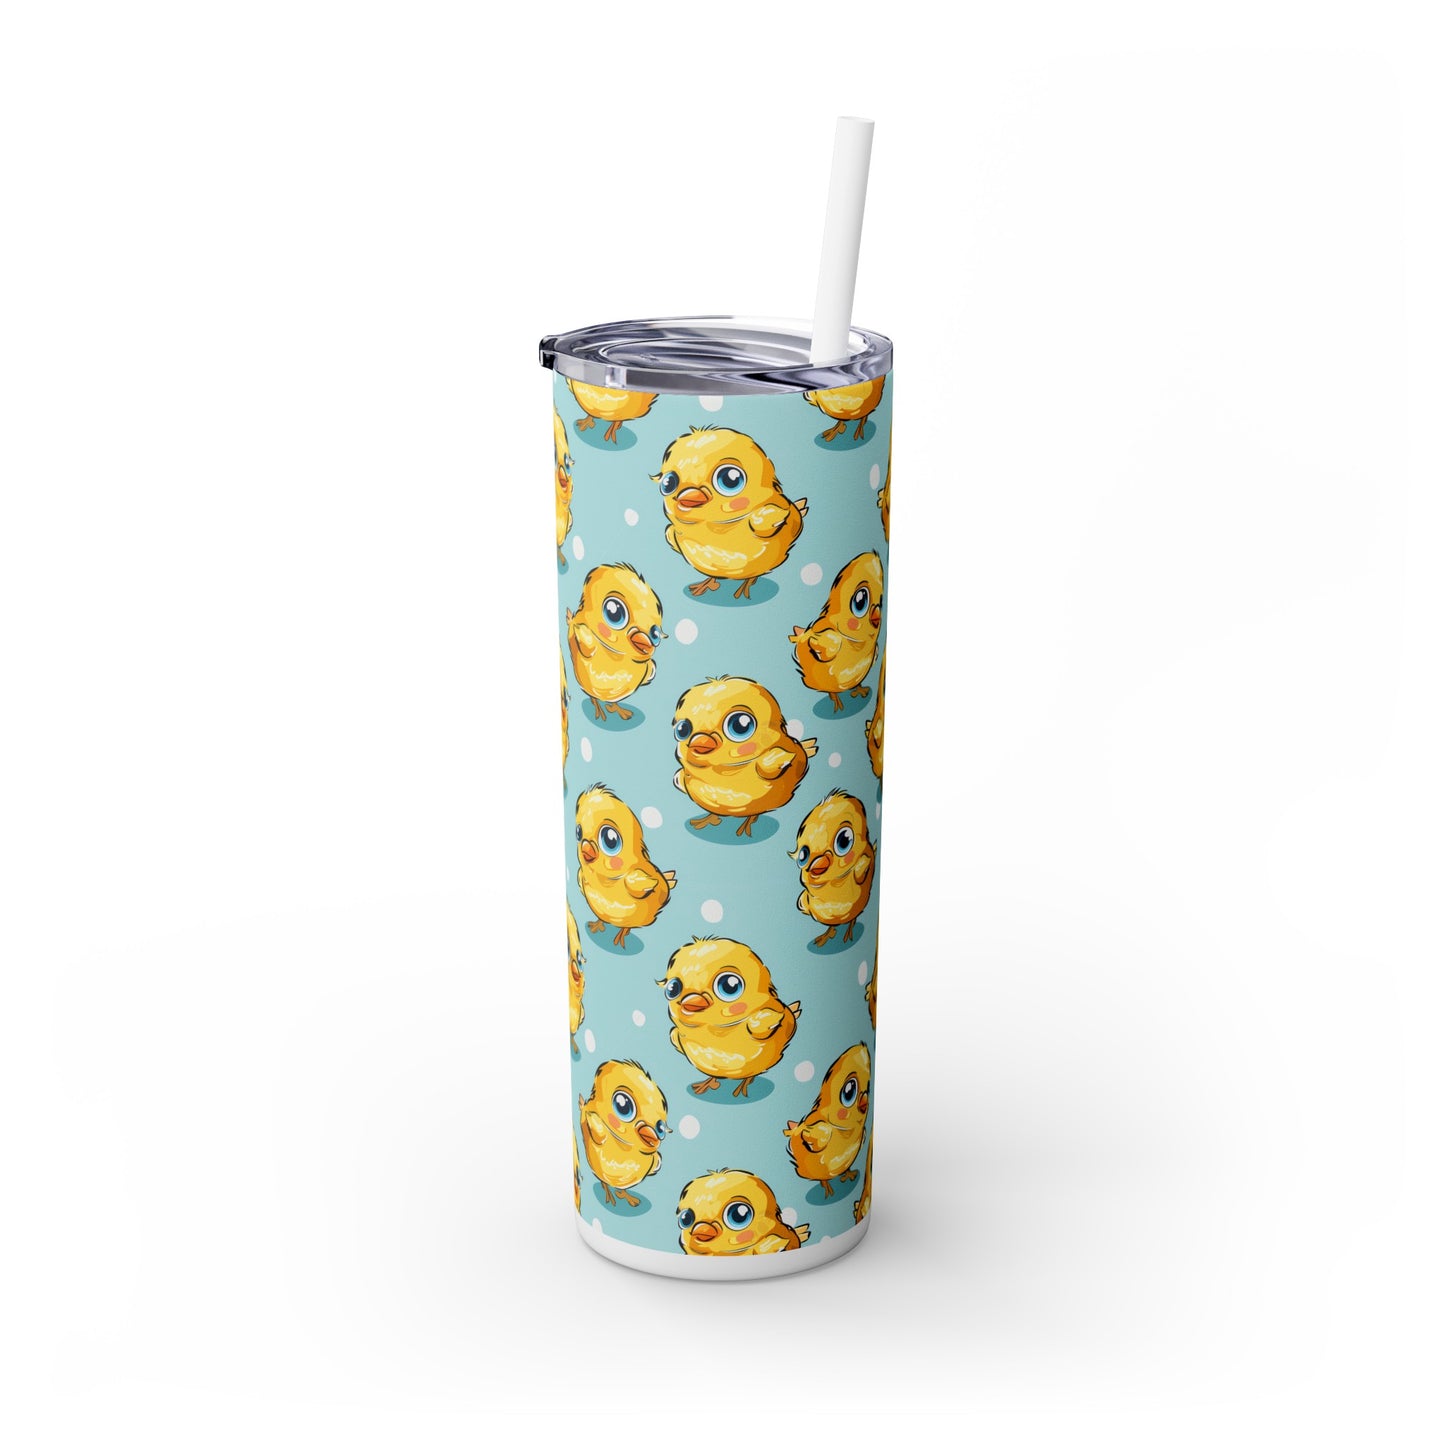 Insulated 20 oz Tumbler with Lid & Straw, Cute Baby Chicks - Double-walled Stainless Steel, Keeps Drinks Hot or Cold